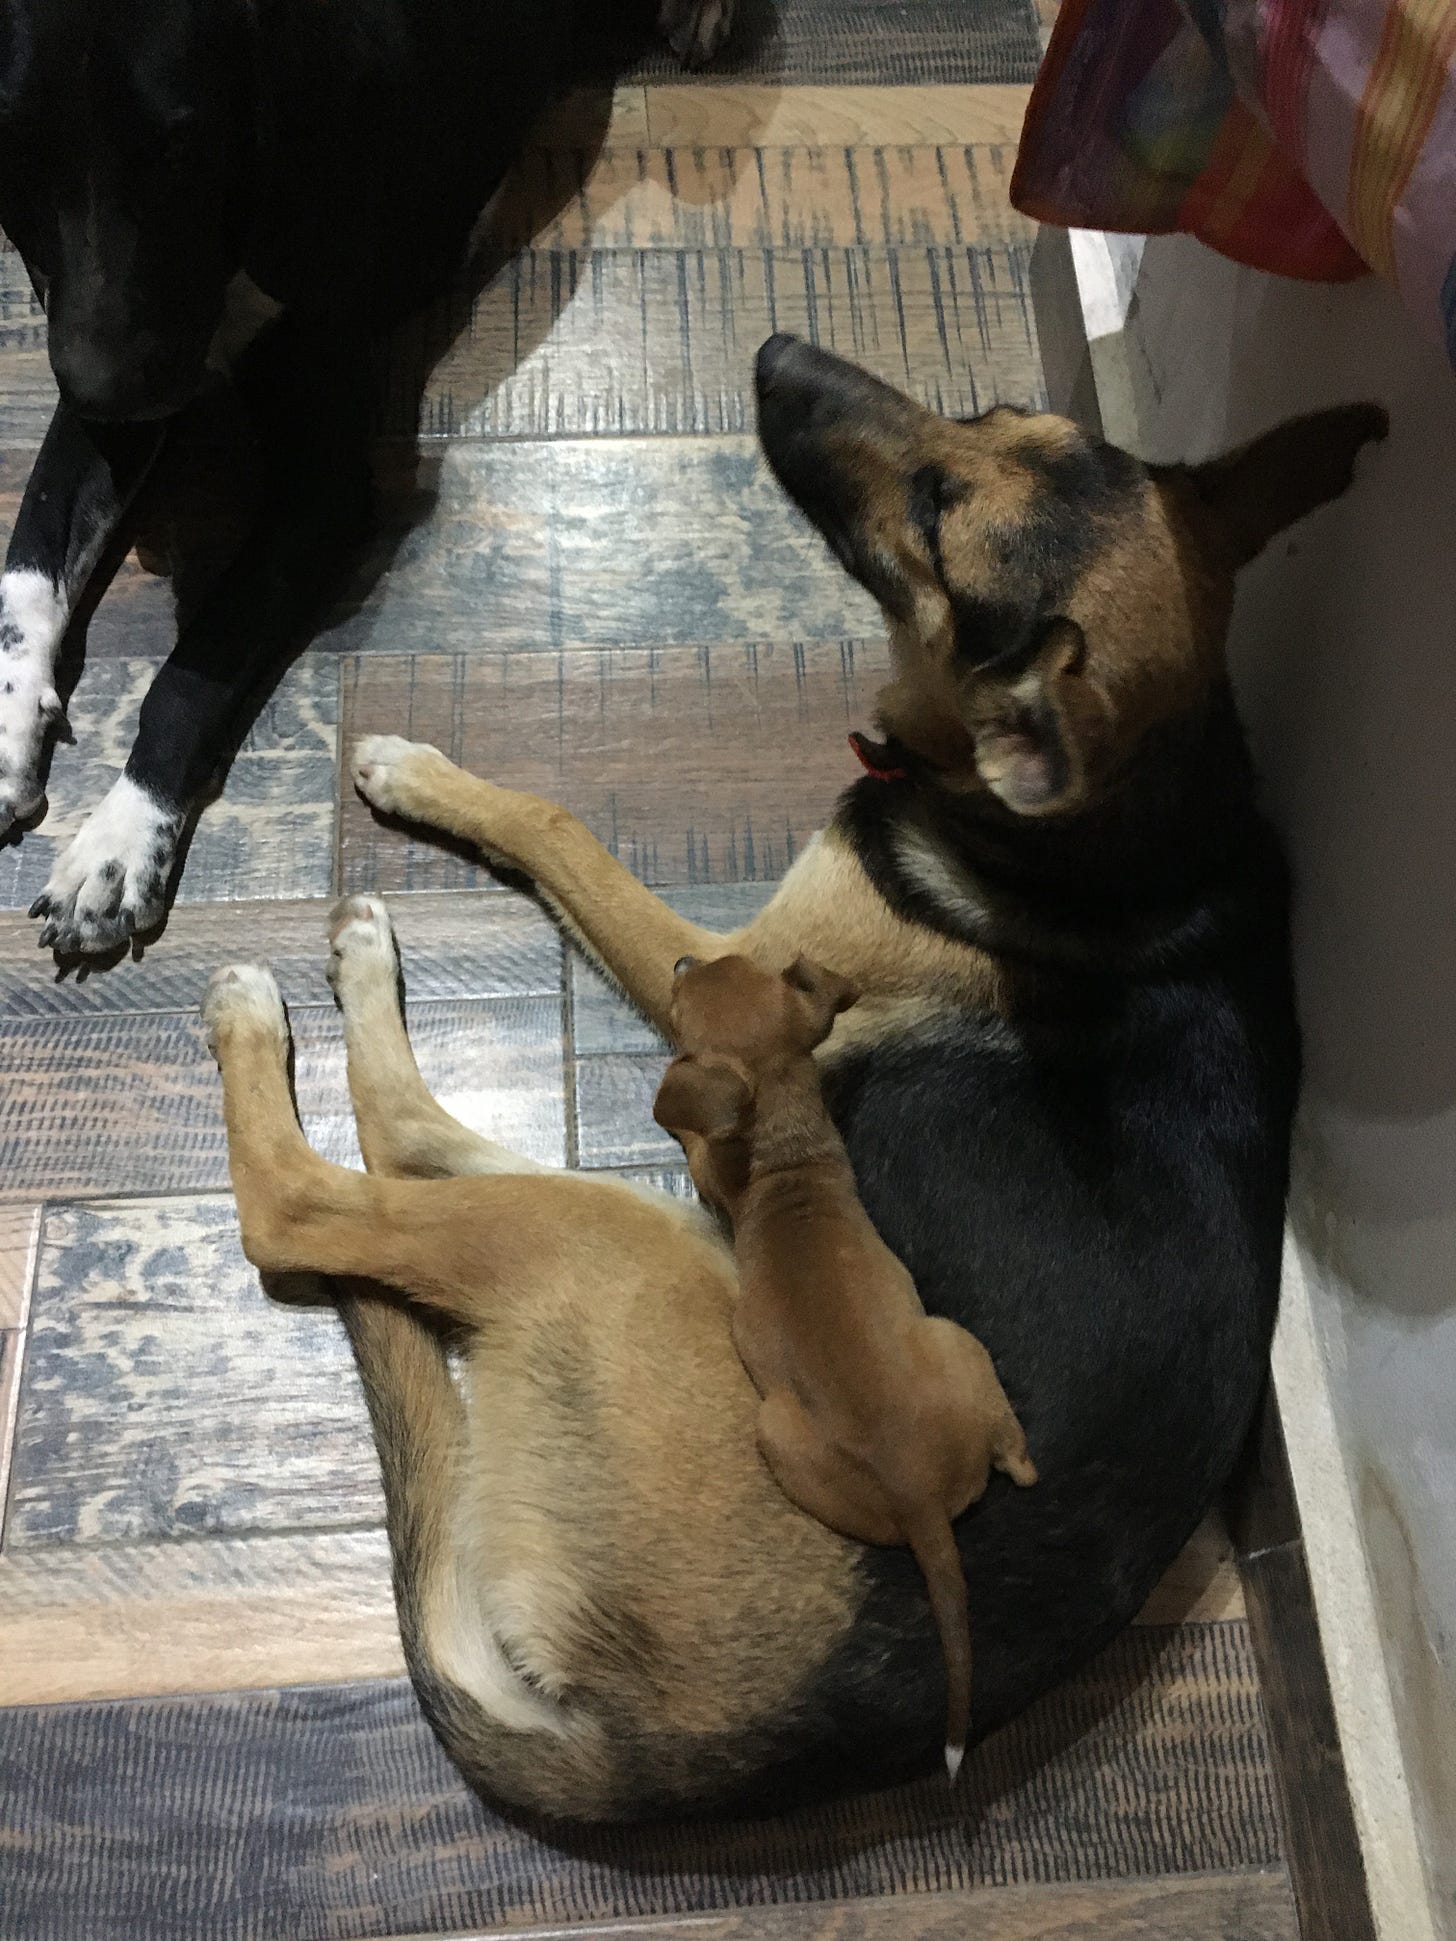 A German Shepherd sitting on the floor with a chihuahua puppy perched on her hip.